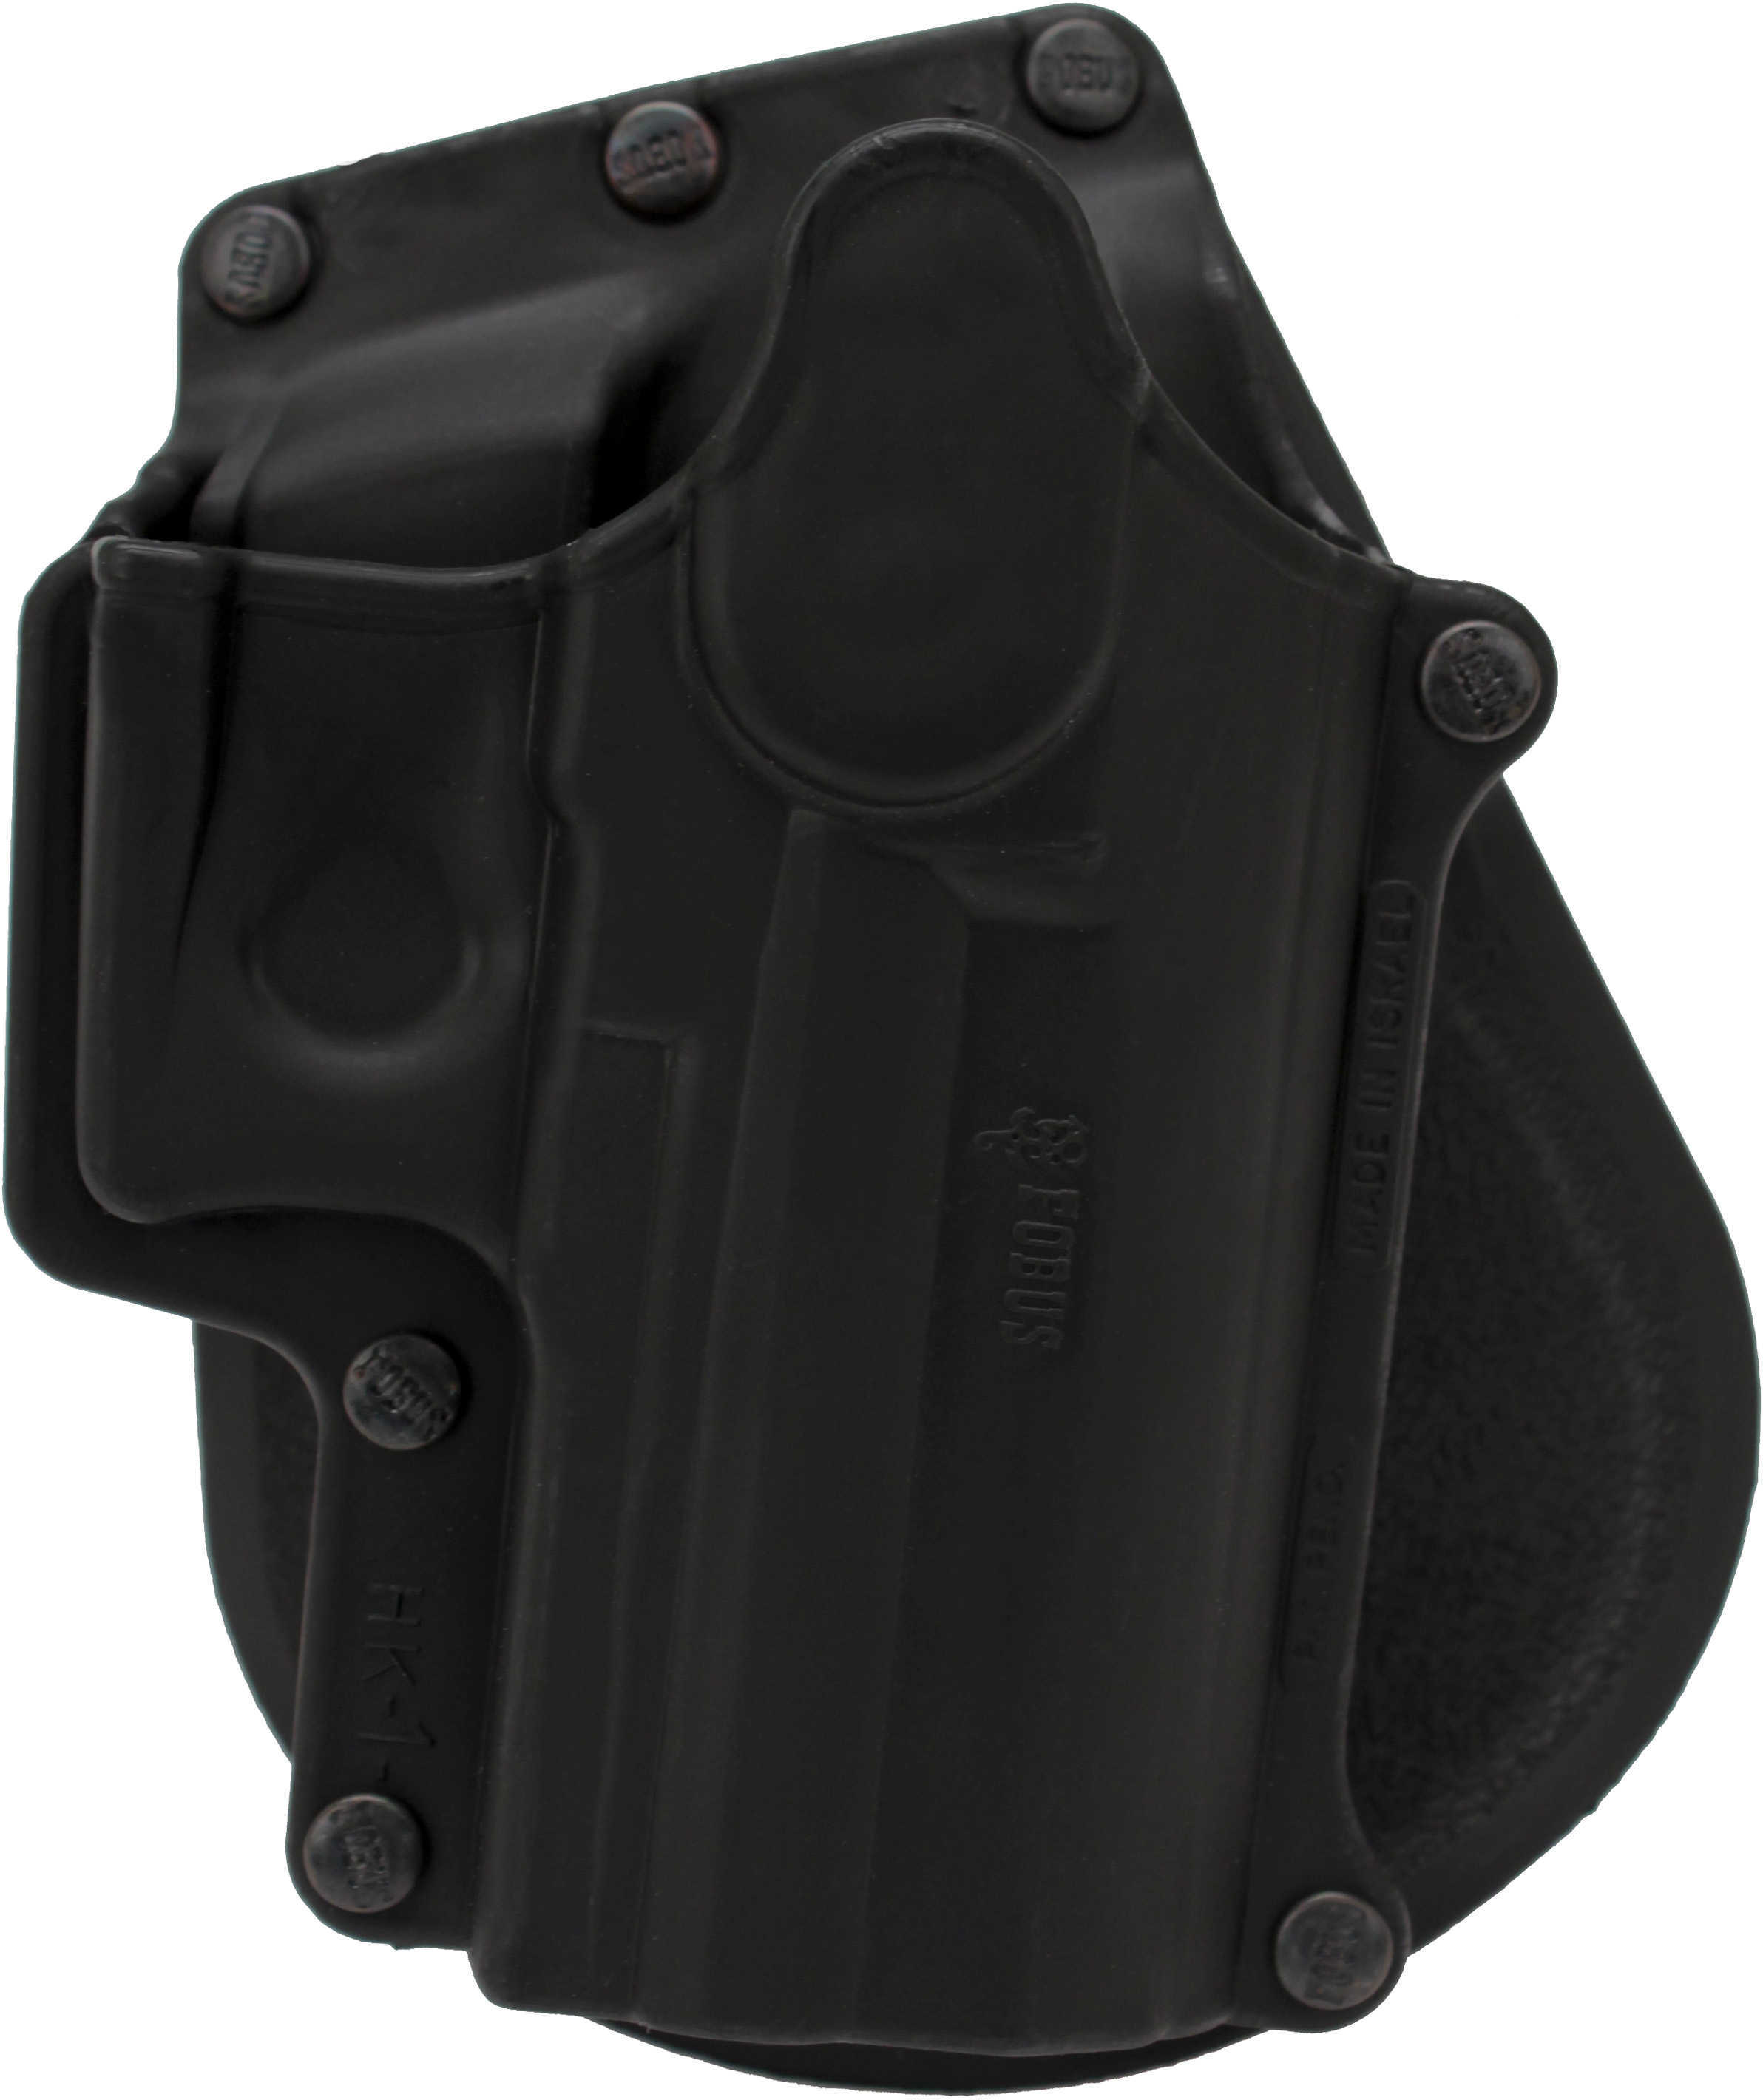 Fobus Holster Paddle For H&K Compact And USP 9/40/45